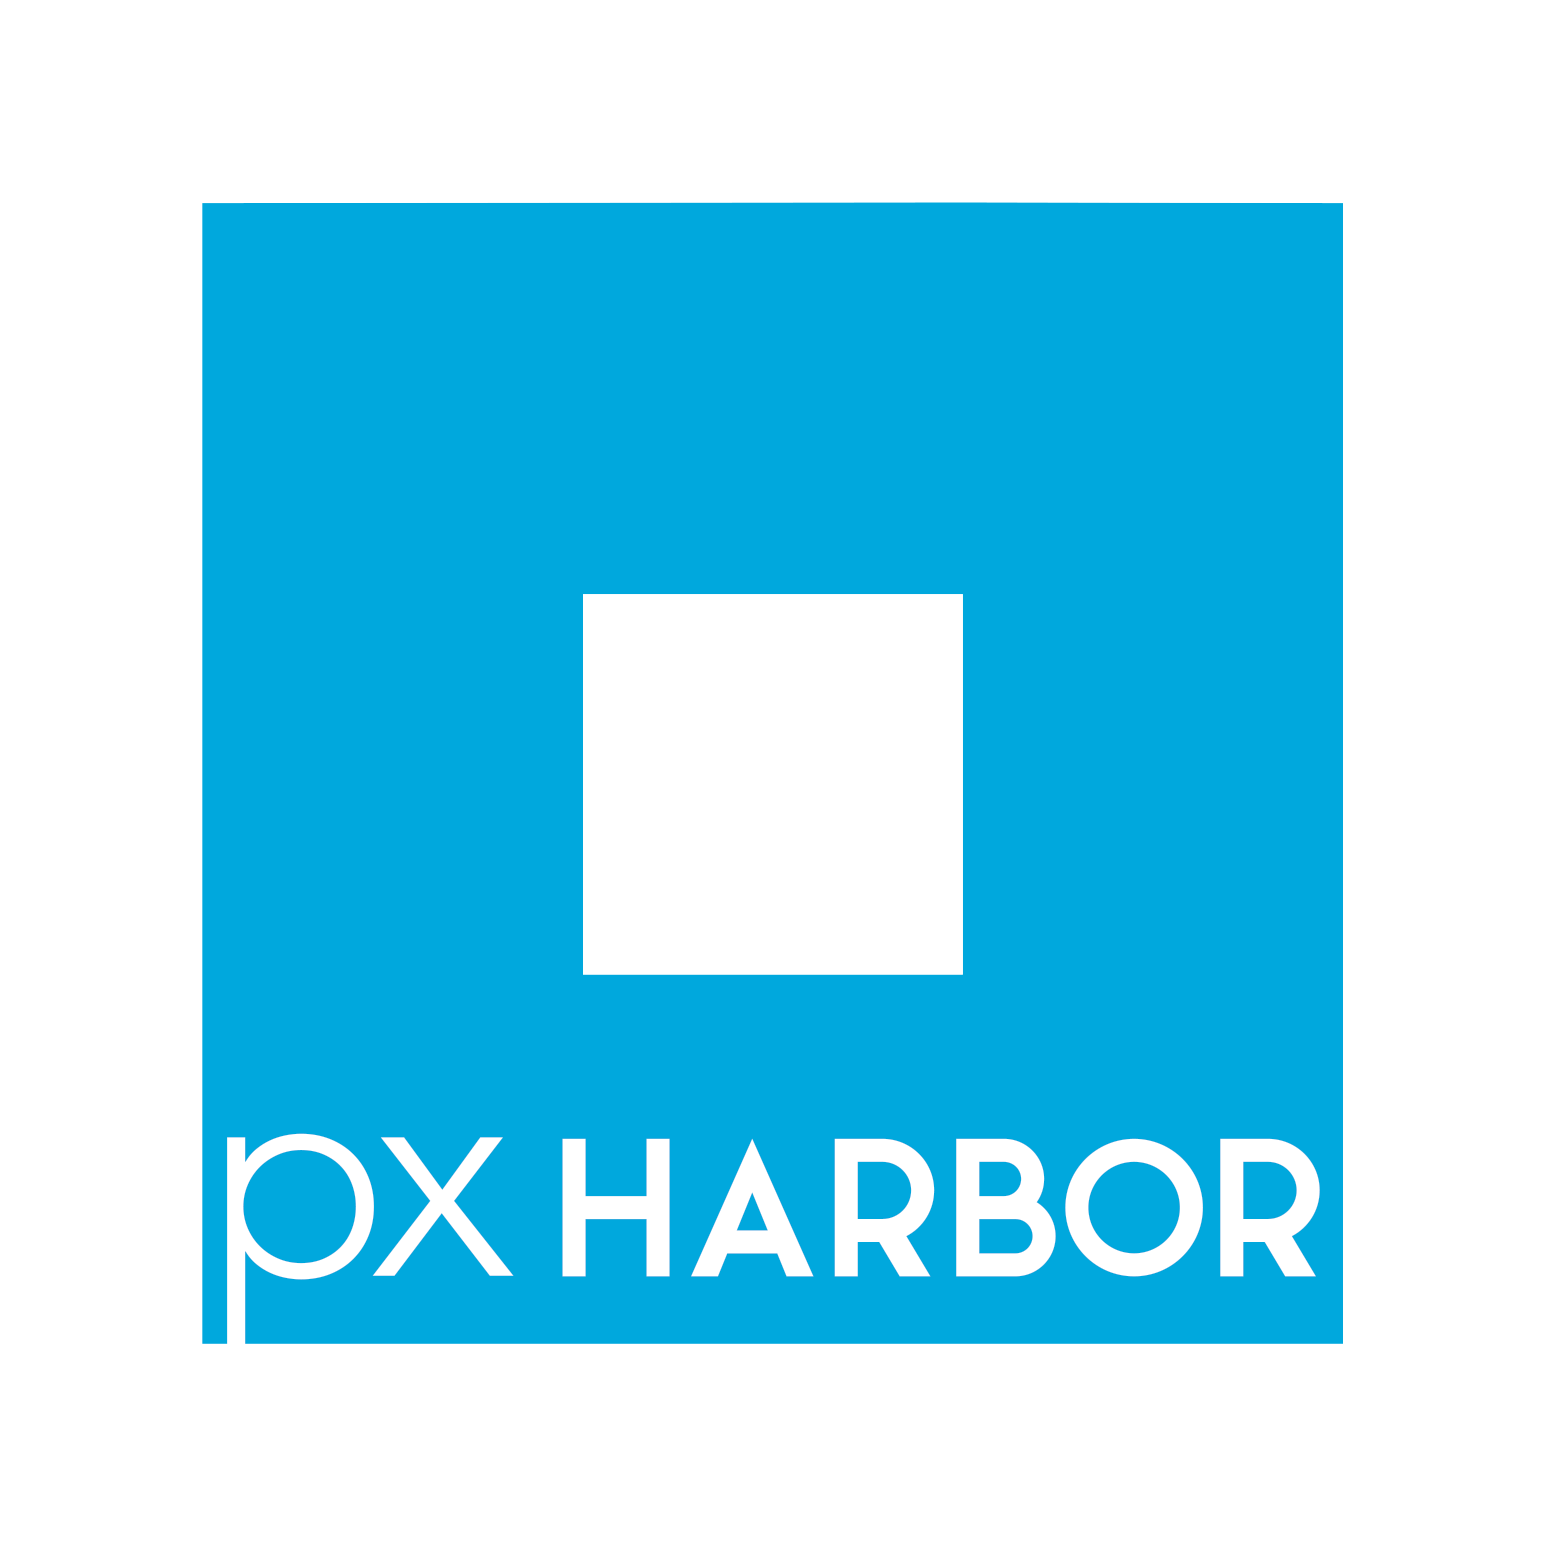 PxHarbor - The Webshop